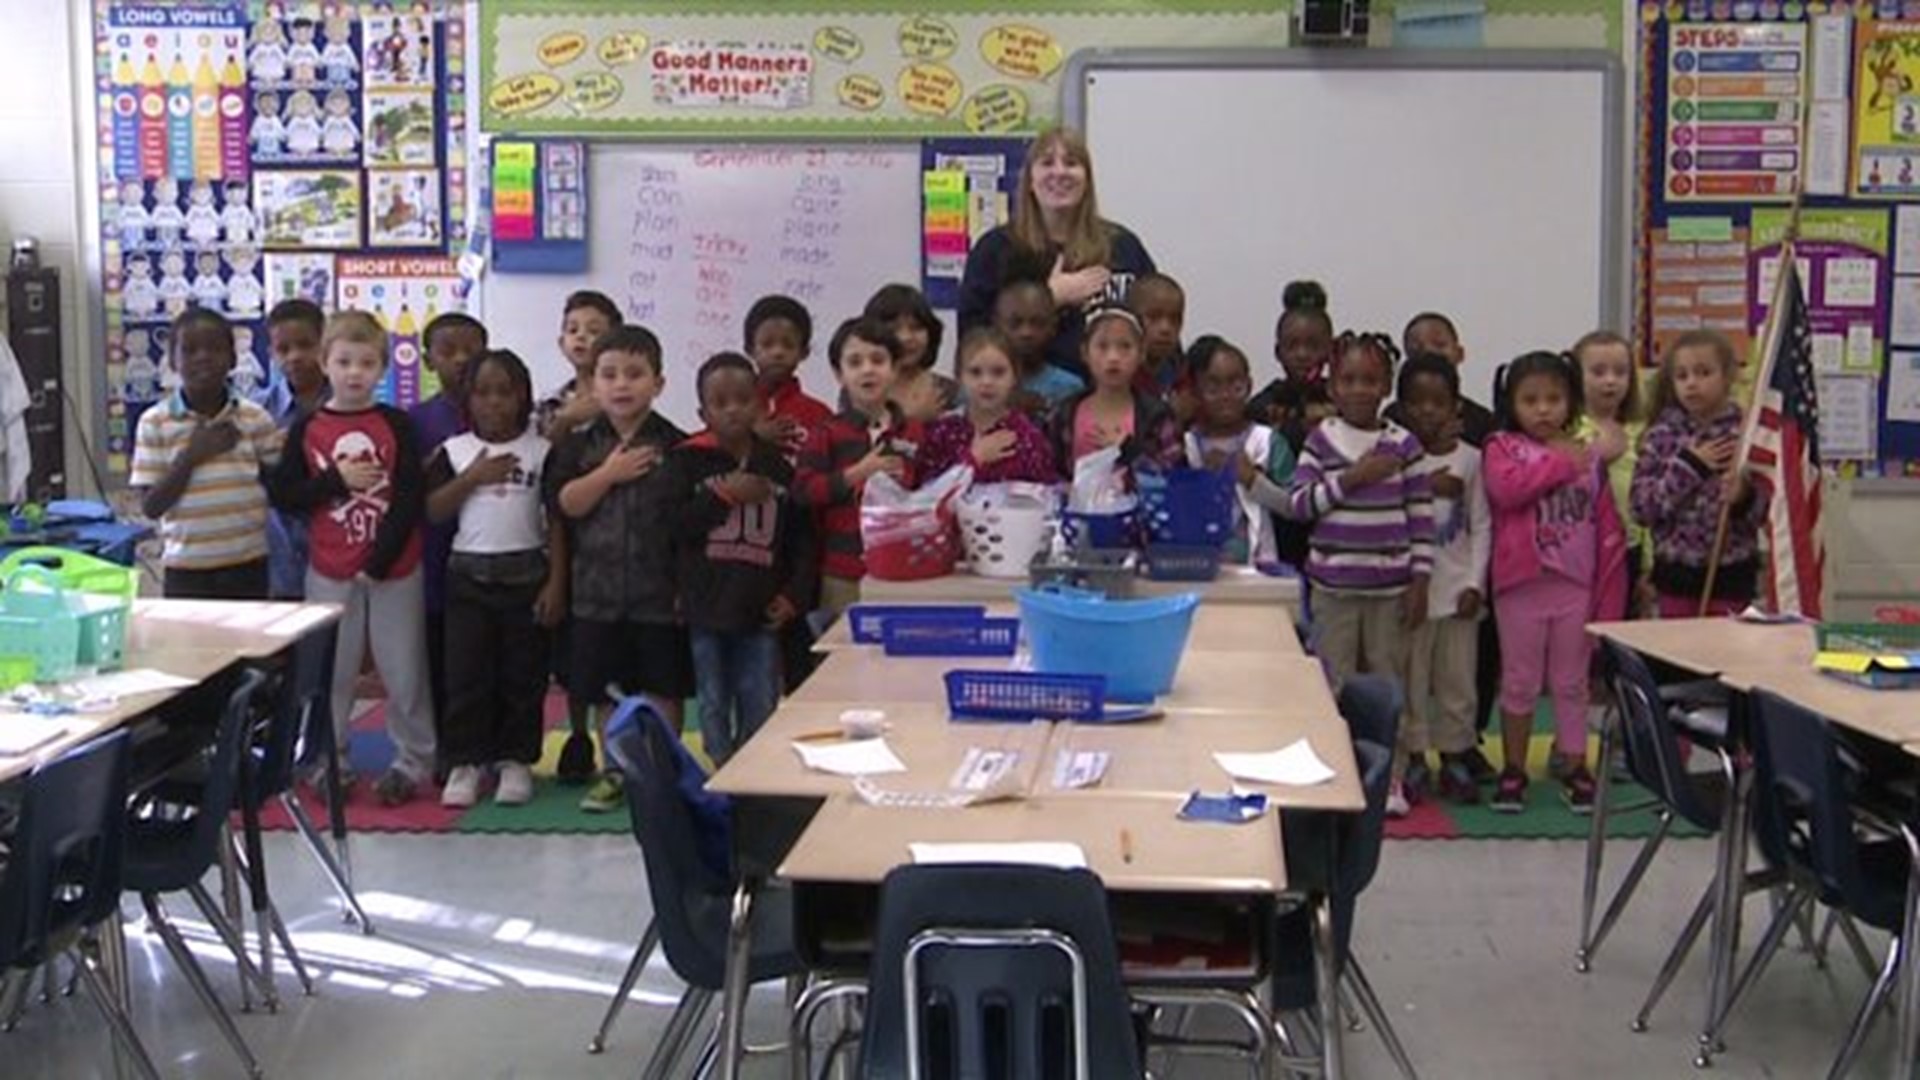 The Pledge from Mrs Meyer`s class